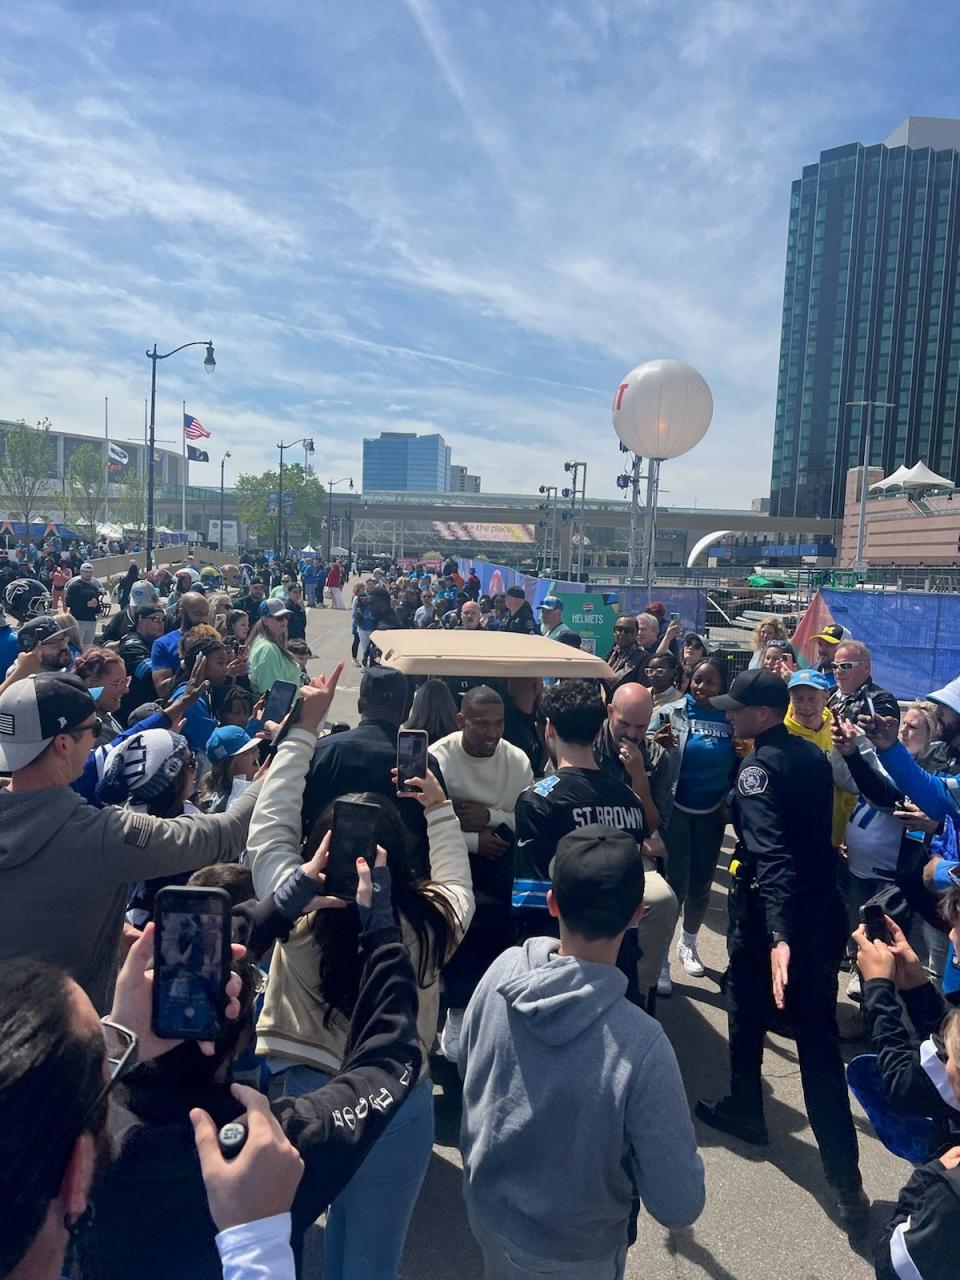 Detroit Lions star wide receiver Amon-Ra St. Brown makes his way through the crowd on a golf cart during festivities related to the NFL draft Friday